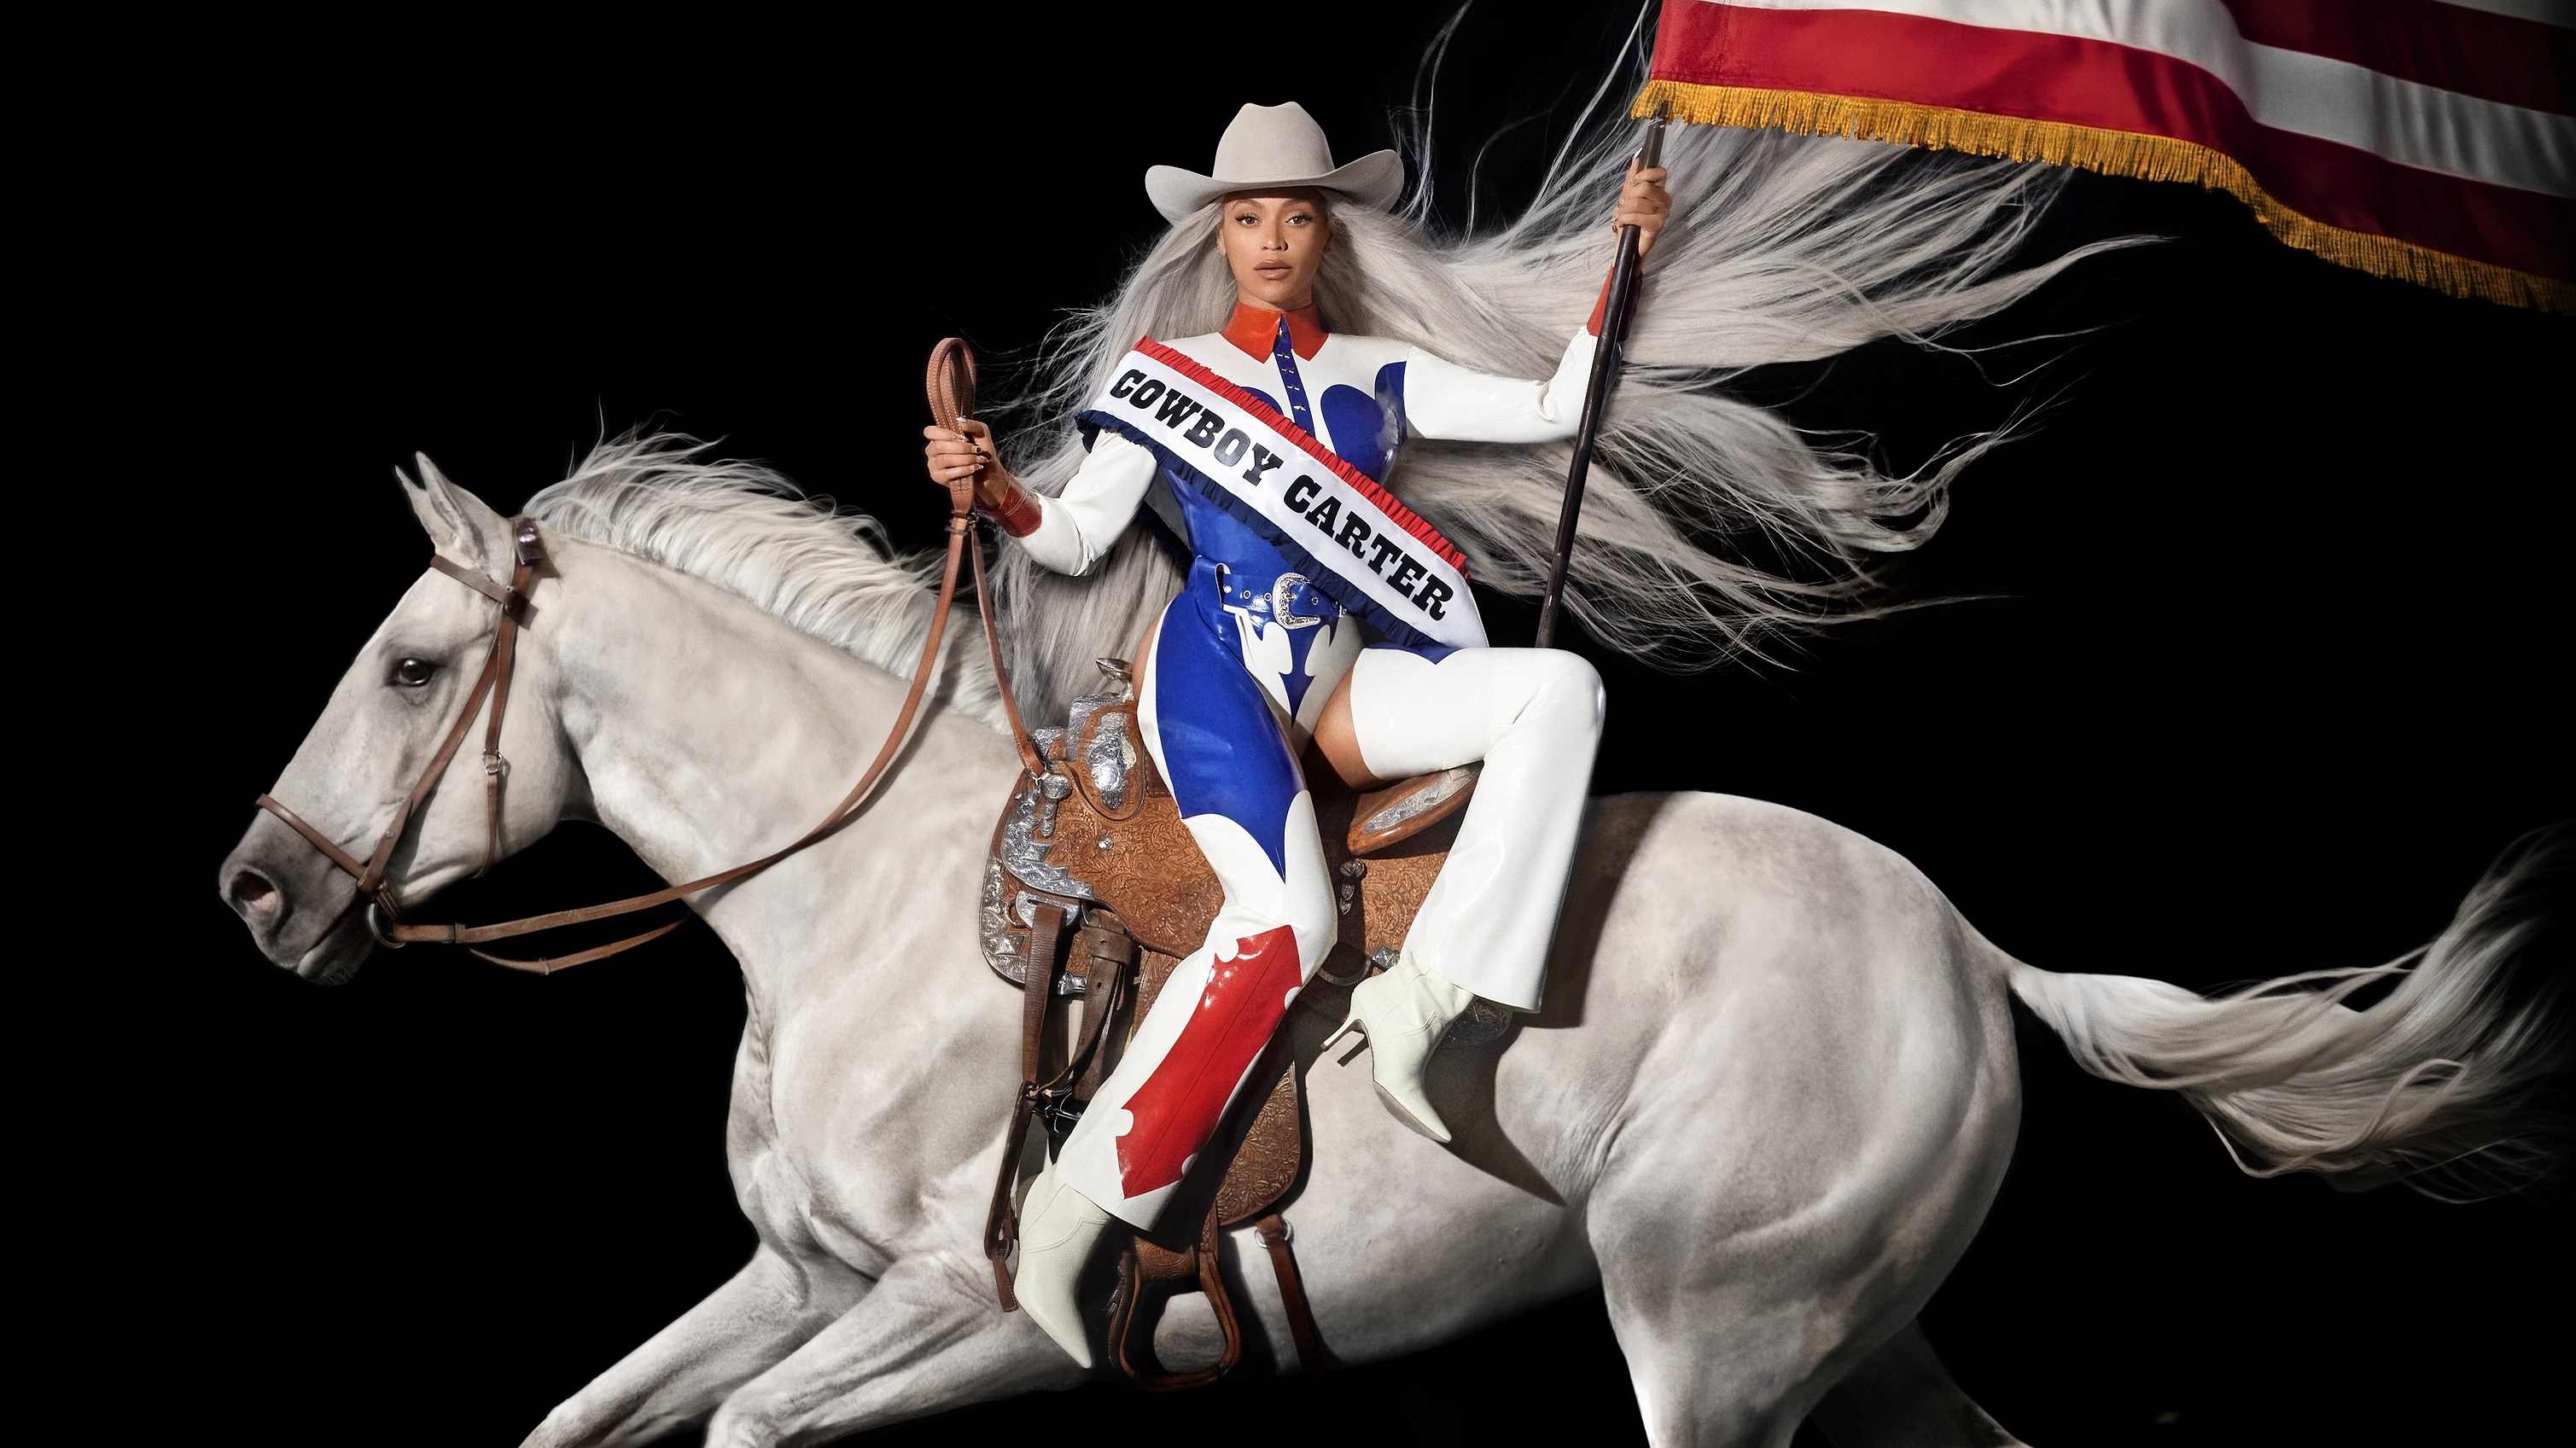 Beyoncé’s new album, Act II: Cowboy Carter, is the second instalment in a planned trilogy